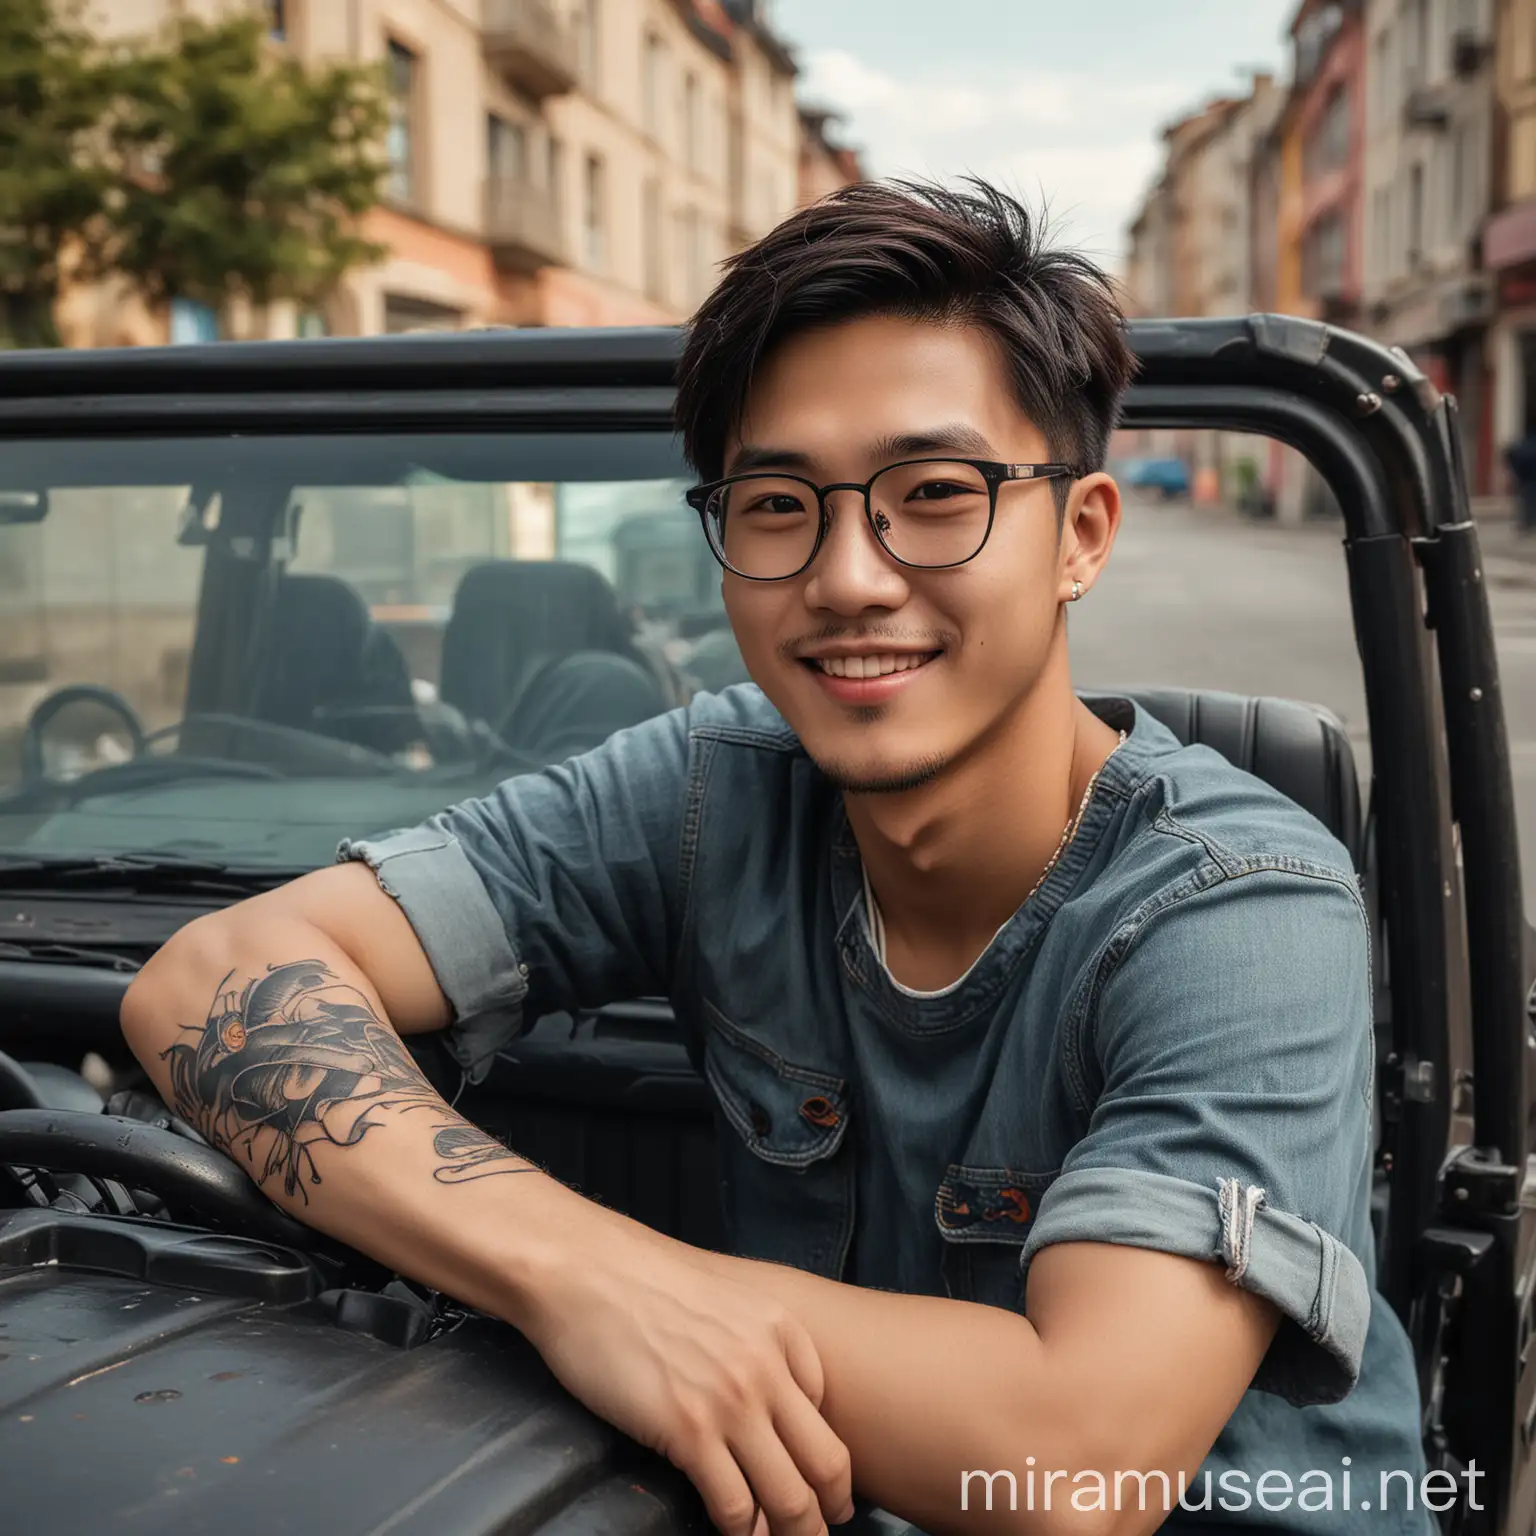 Handsome Korean Man with Koi Fish Tattoo in Jeep Rubicon at Sunrise